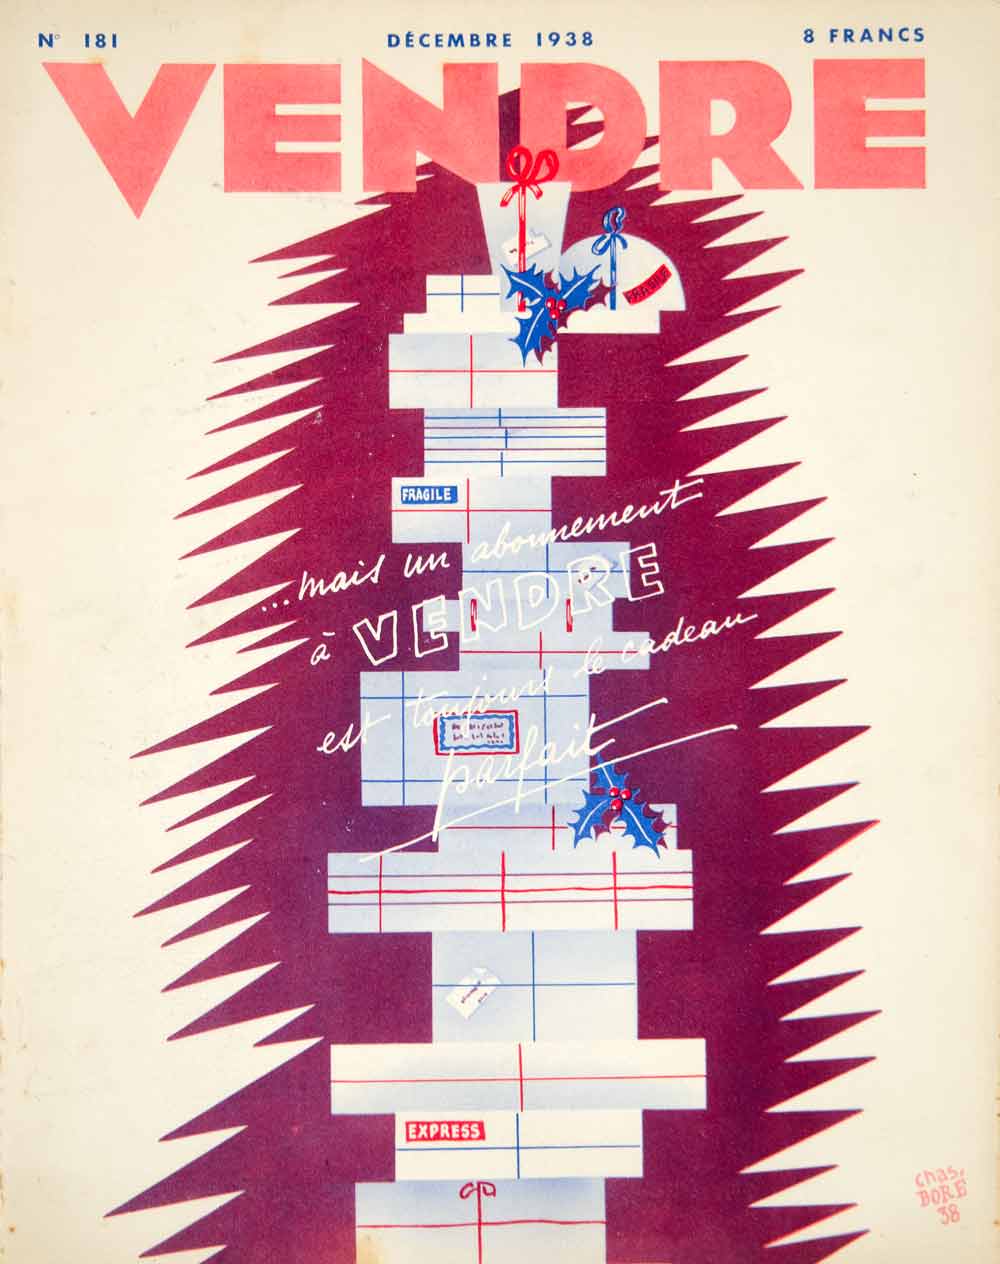 1938 Cover Vendre French Magazine Chas Bore Art Christmas Tree Gift Package VEN9